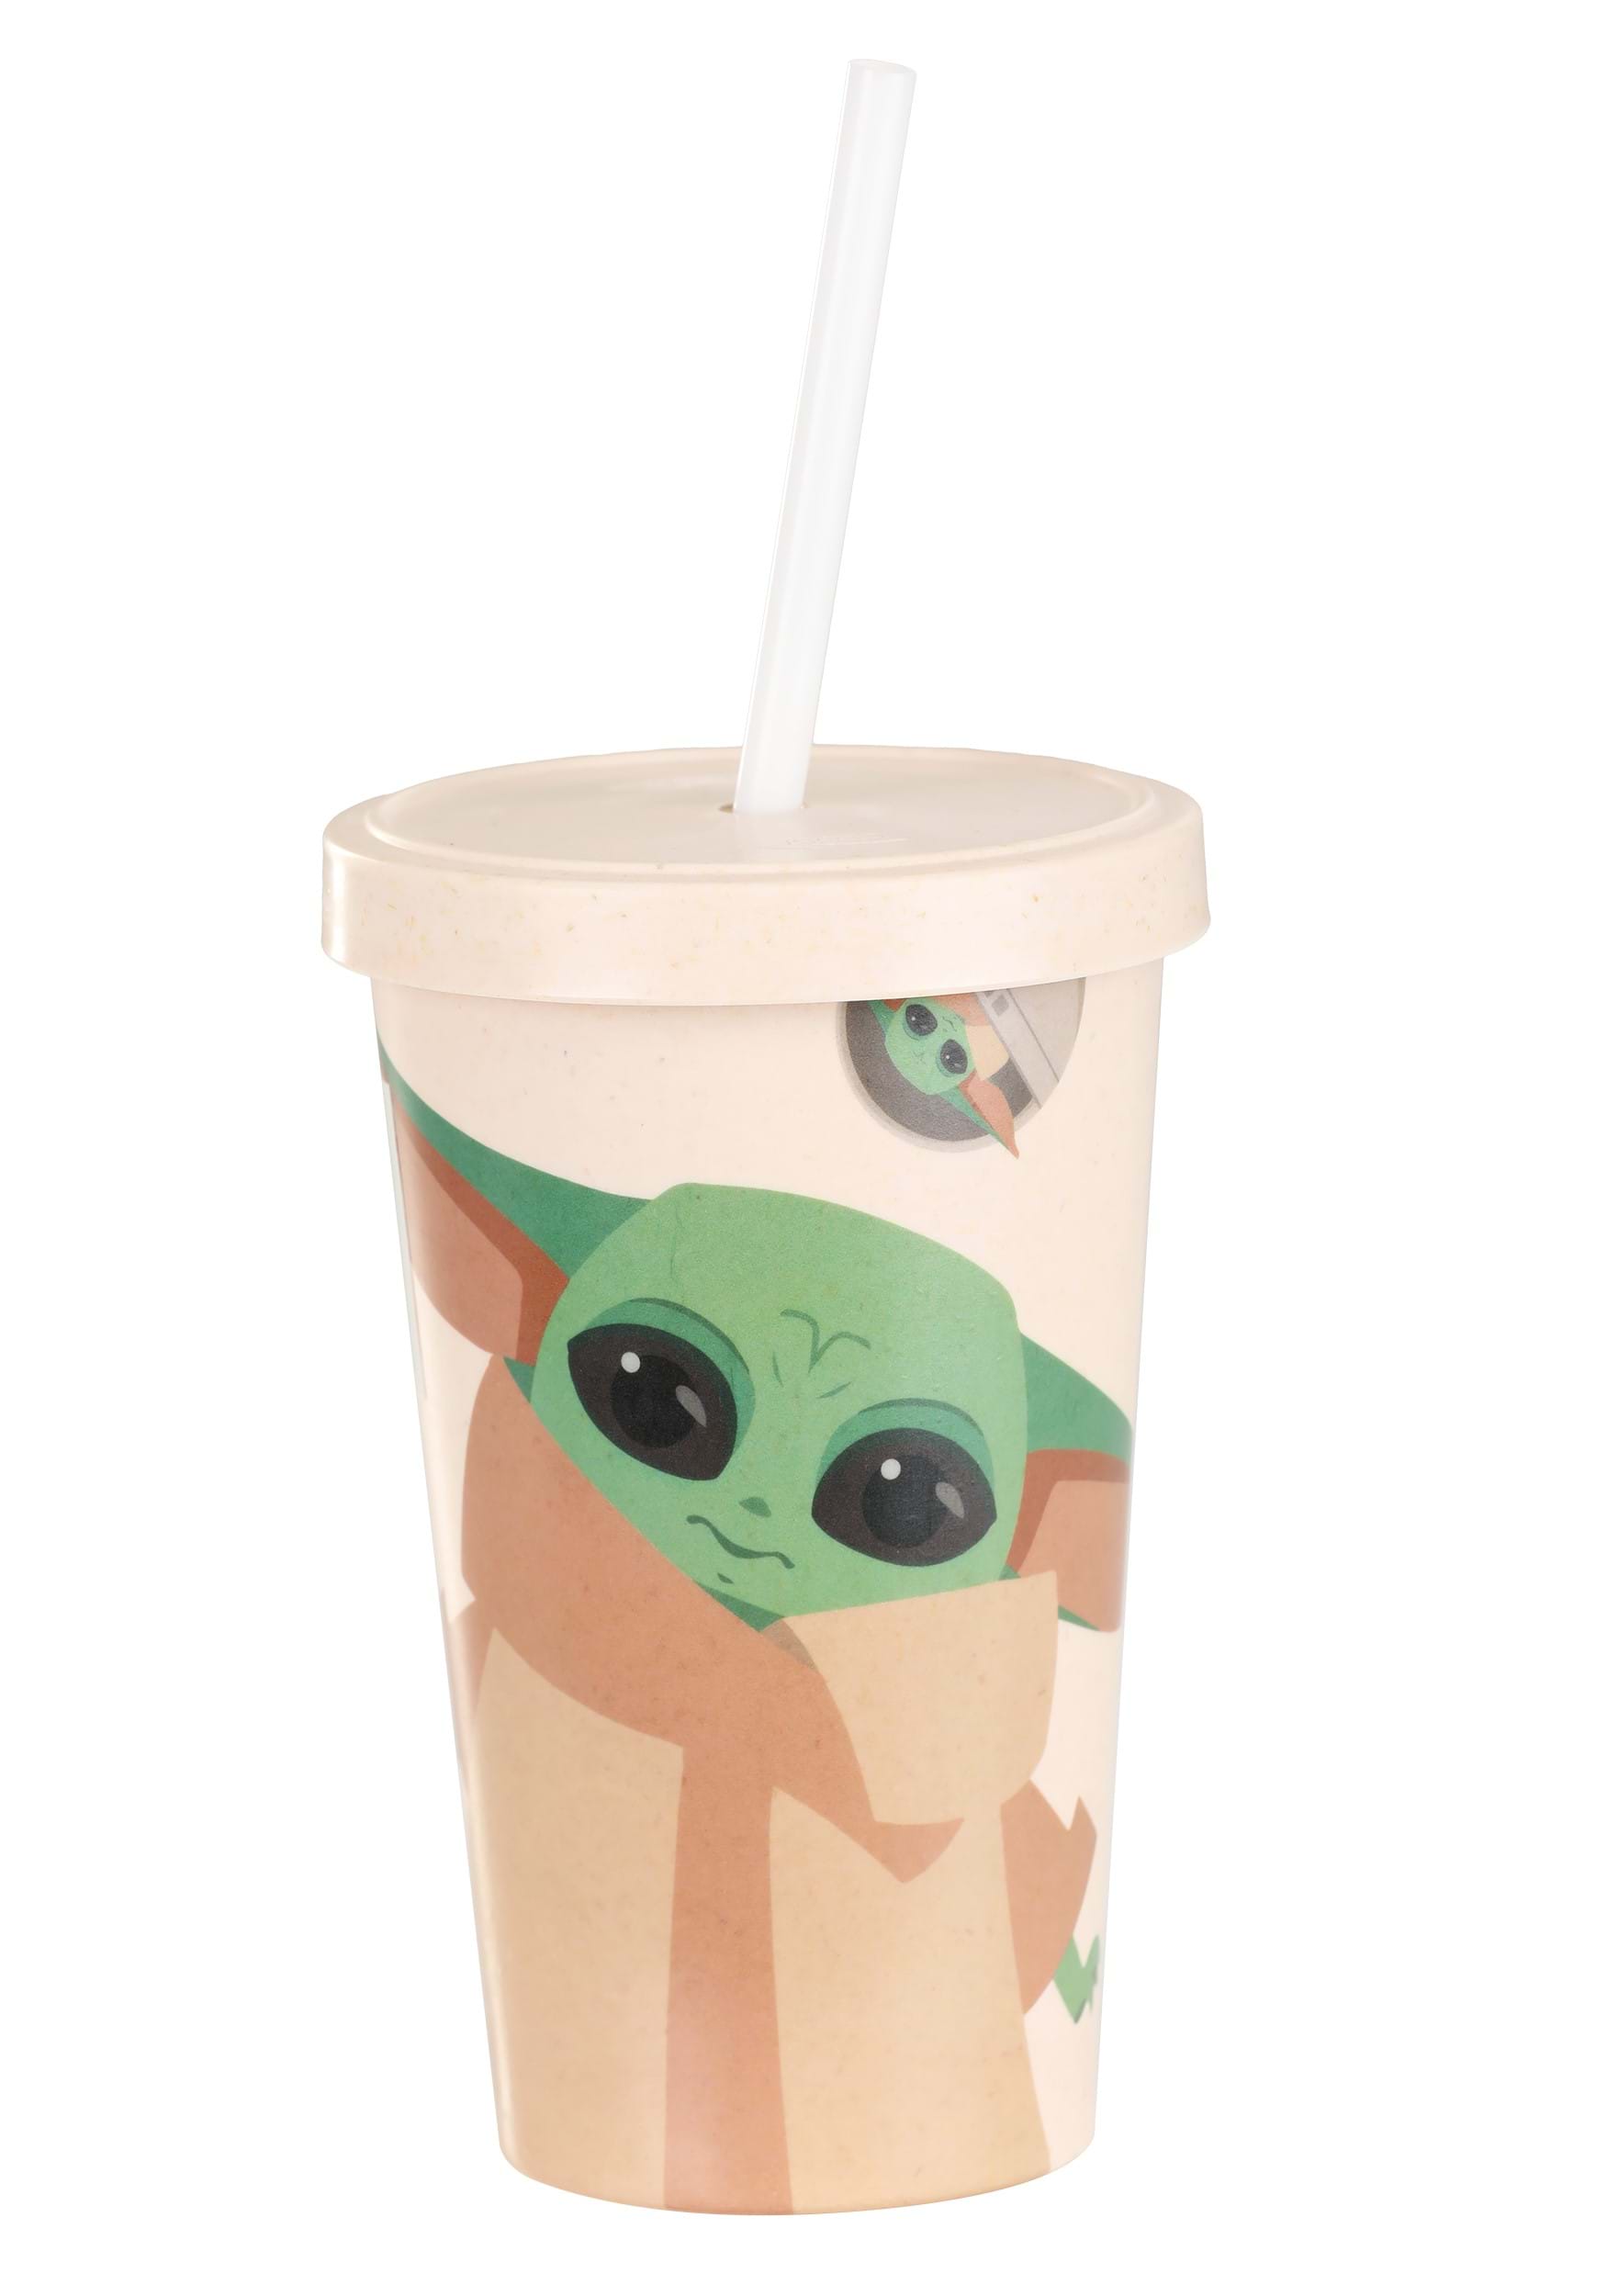 https://images.fun.com/products/84039/1-1/star-wars-the-child-bamboo-tumbler-with-straw-lid.jpg